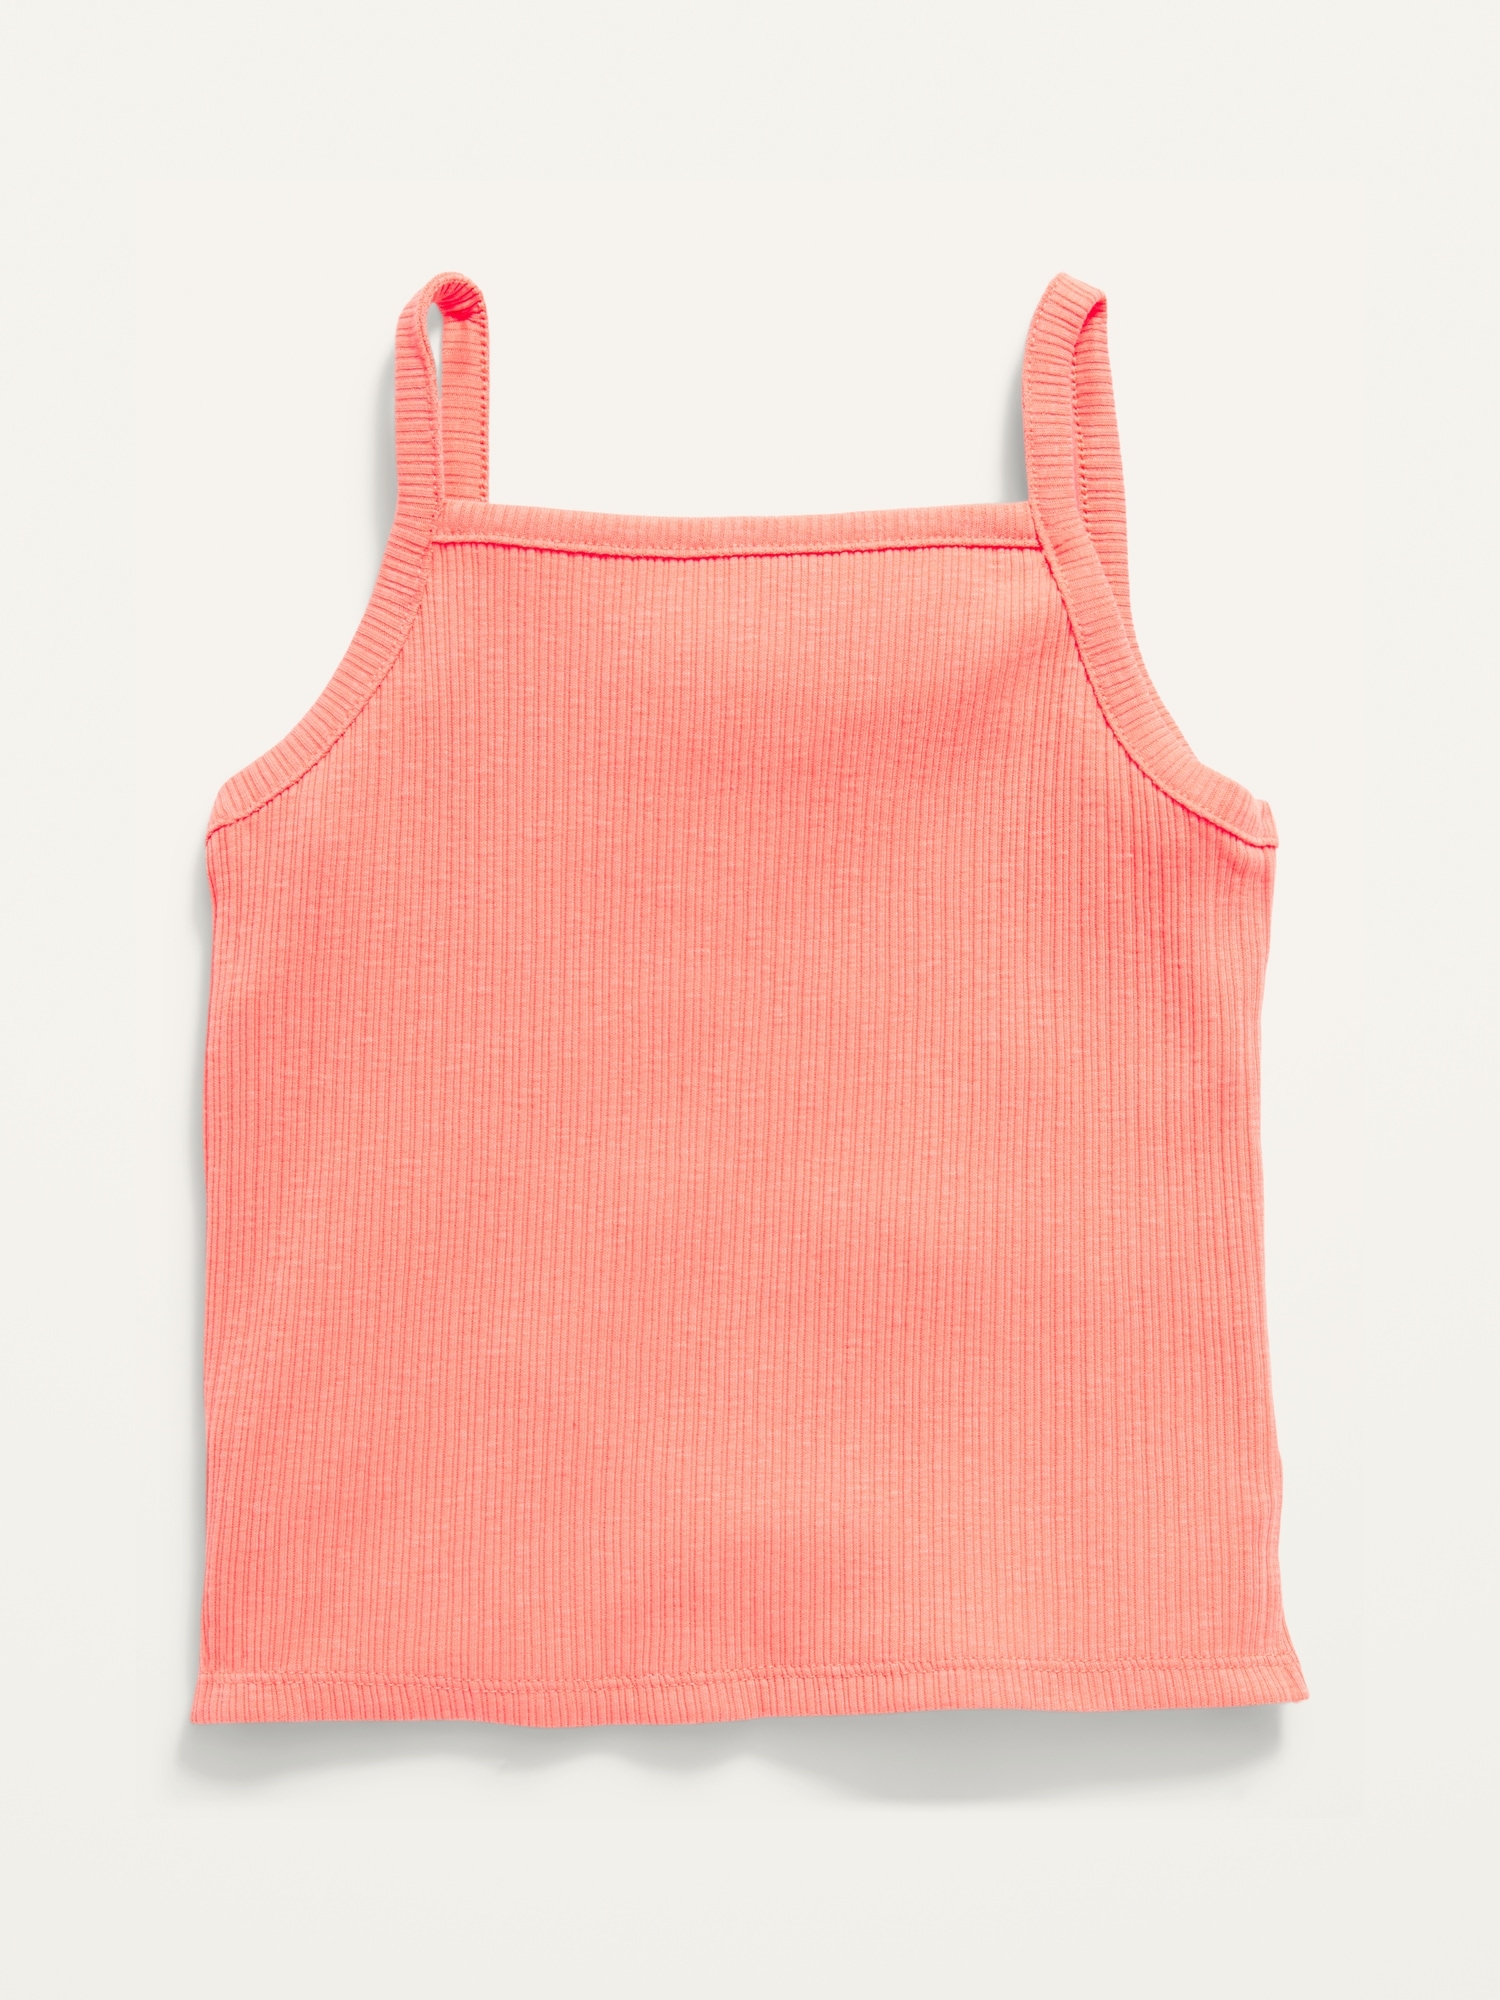 undershirts for girls, undershirts for girls Suppliers and